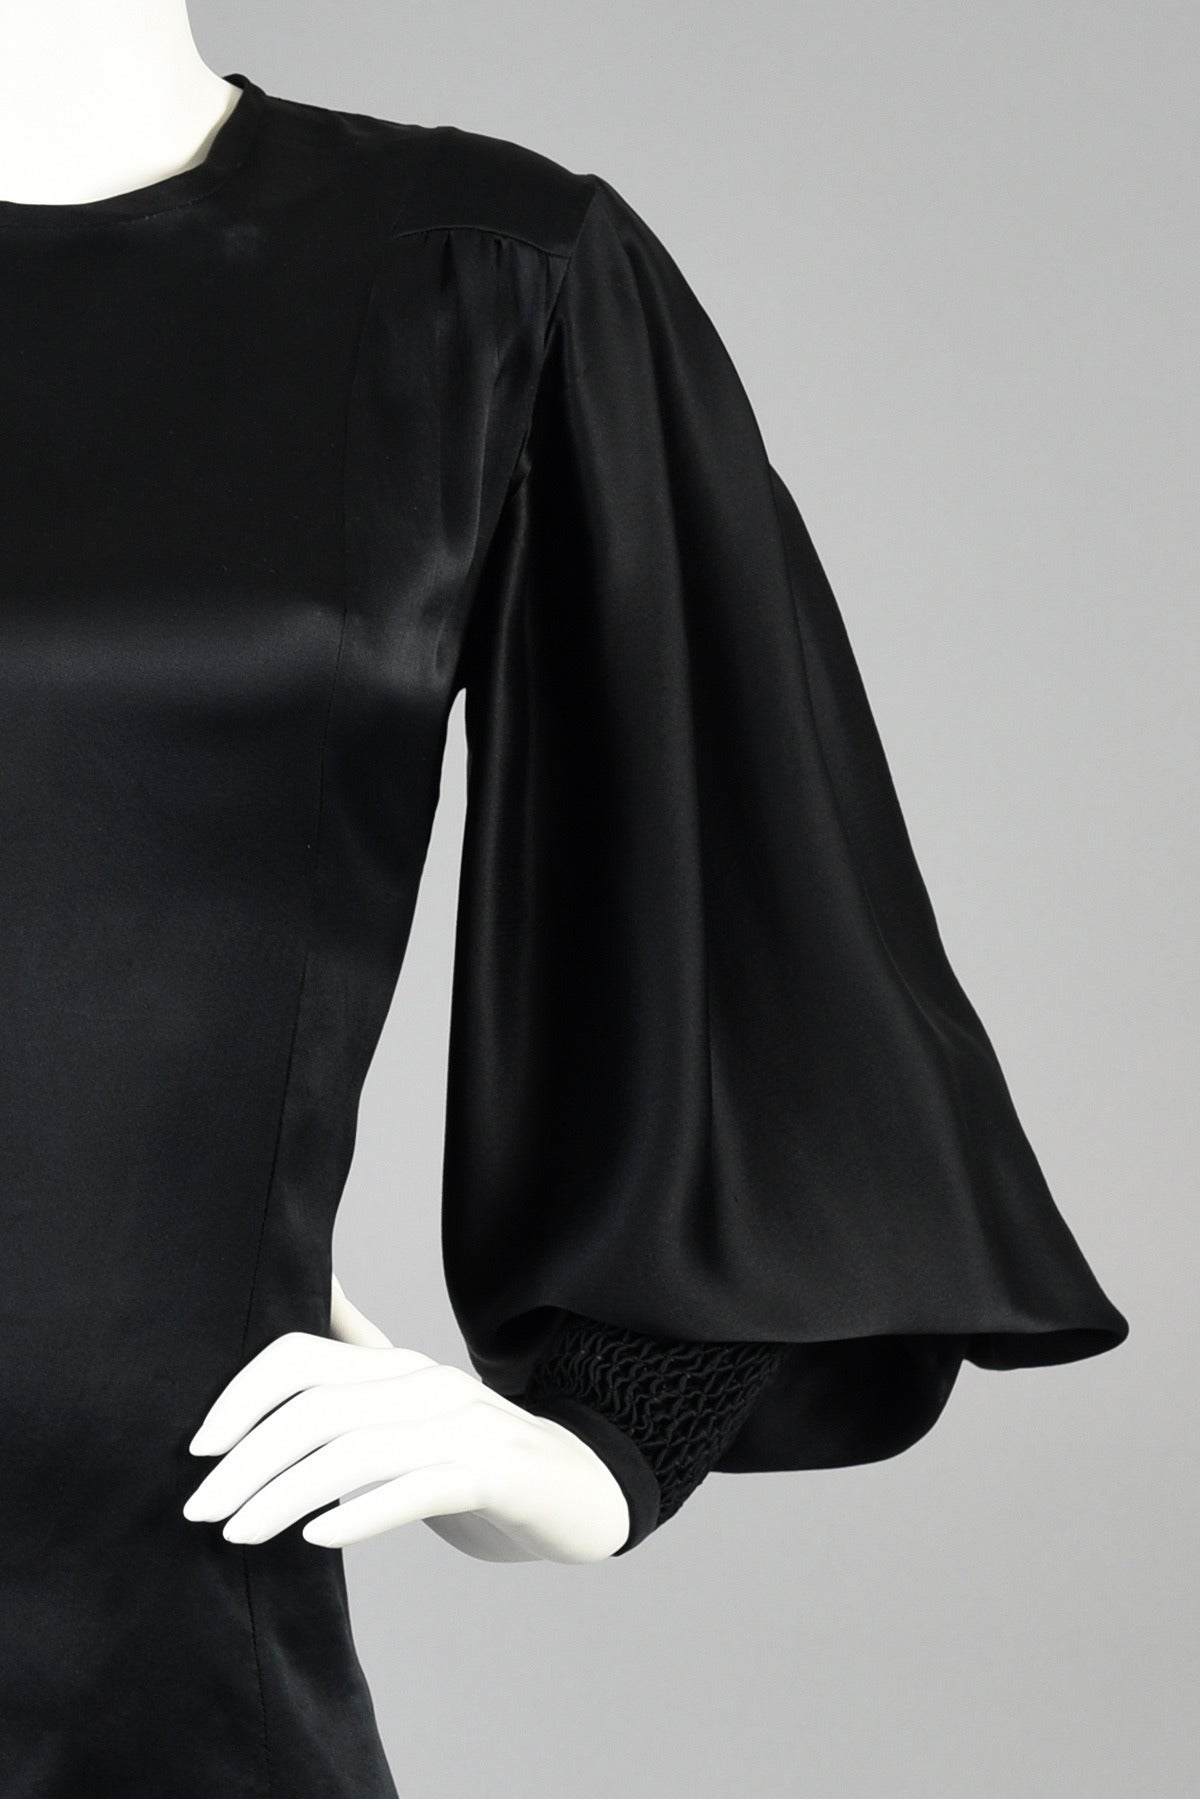 Black 1970's Thea Porter Couture Silk Blouse with Massive Blouson Sleeves For Sale